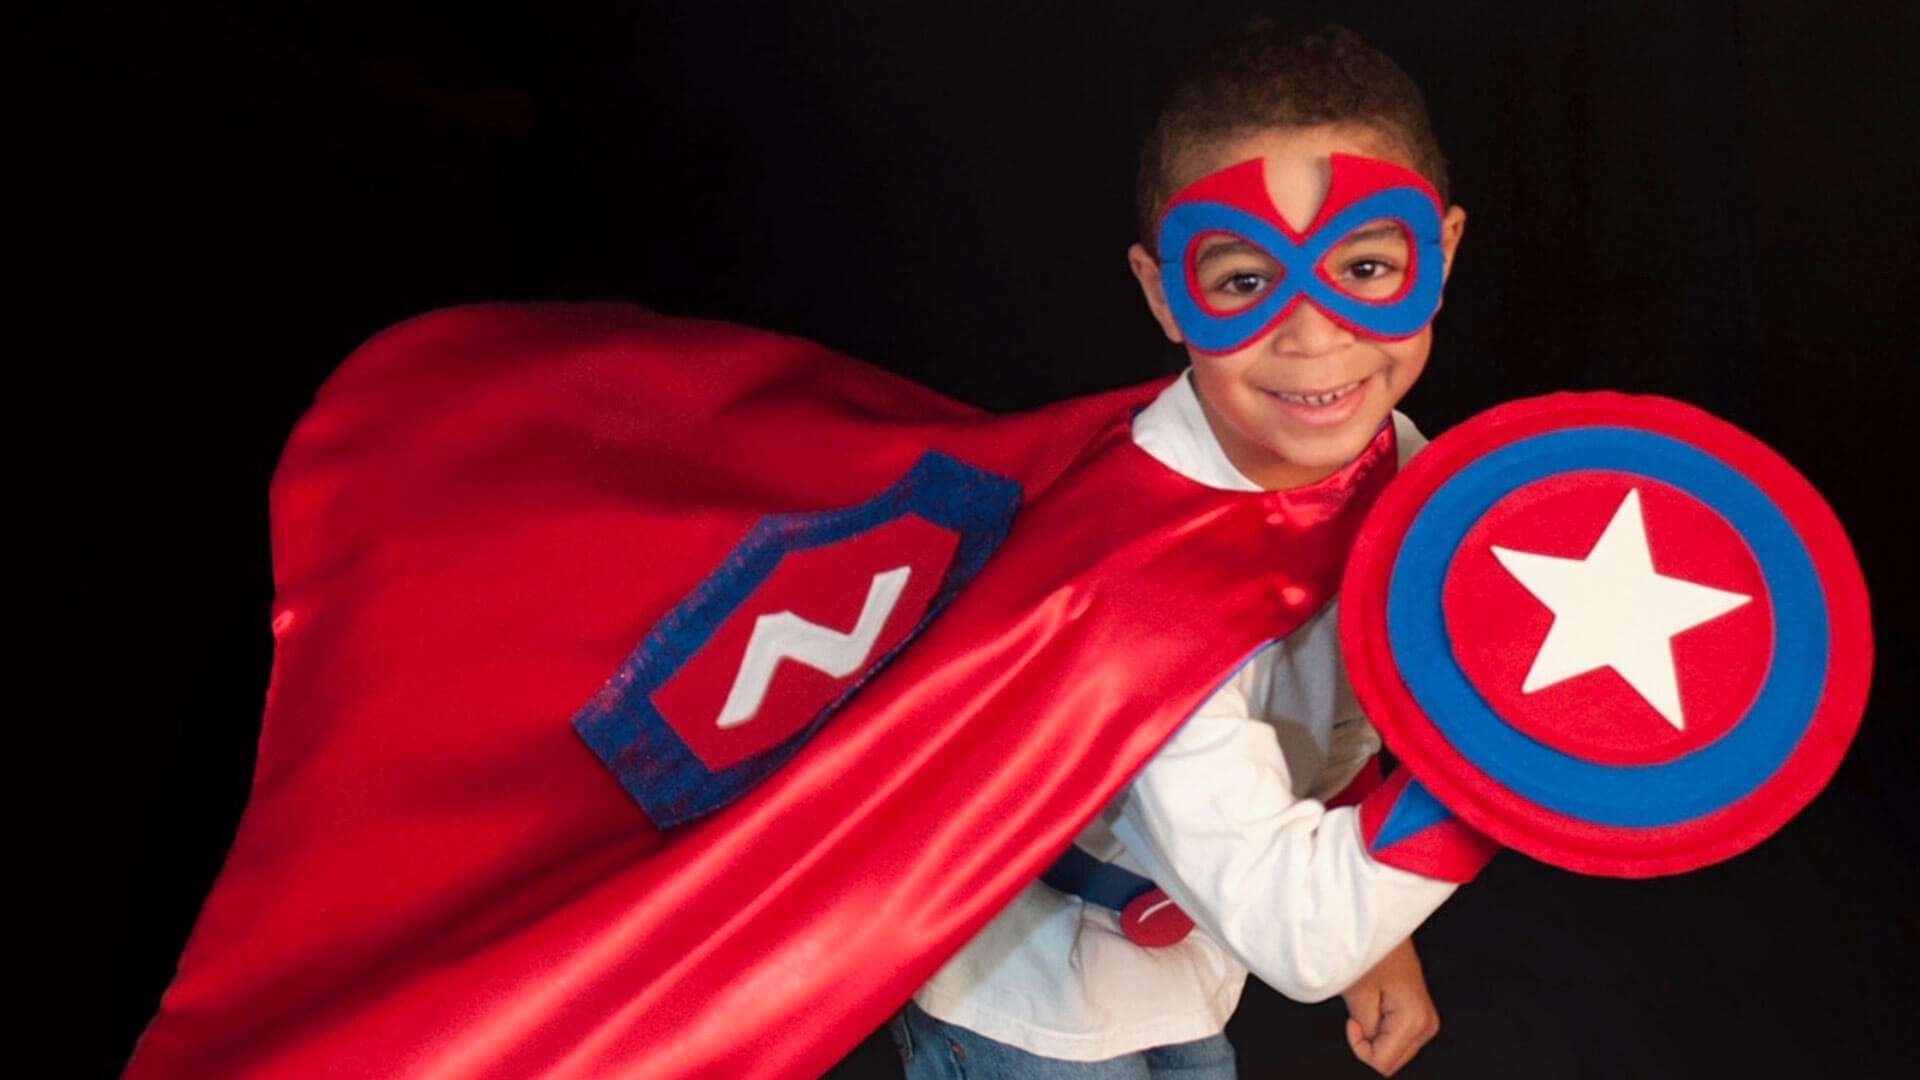 Young boy wearing red and blue superhero cape